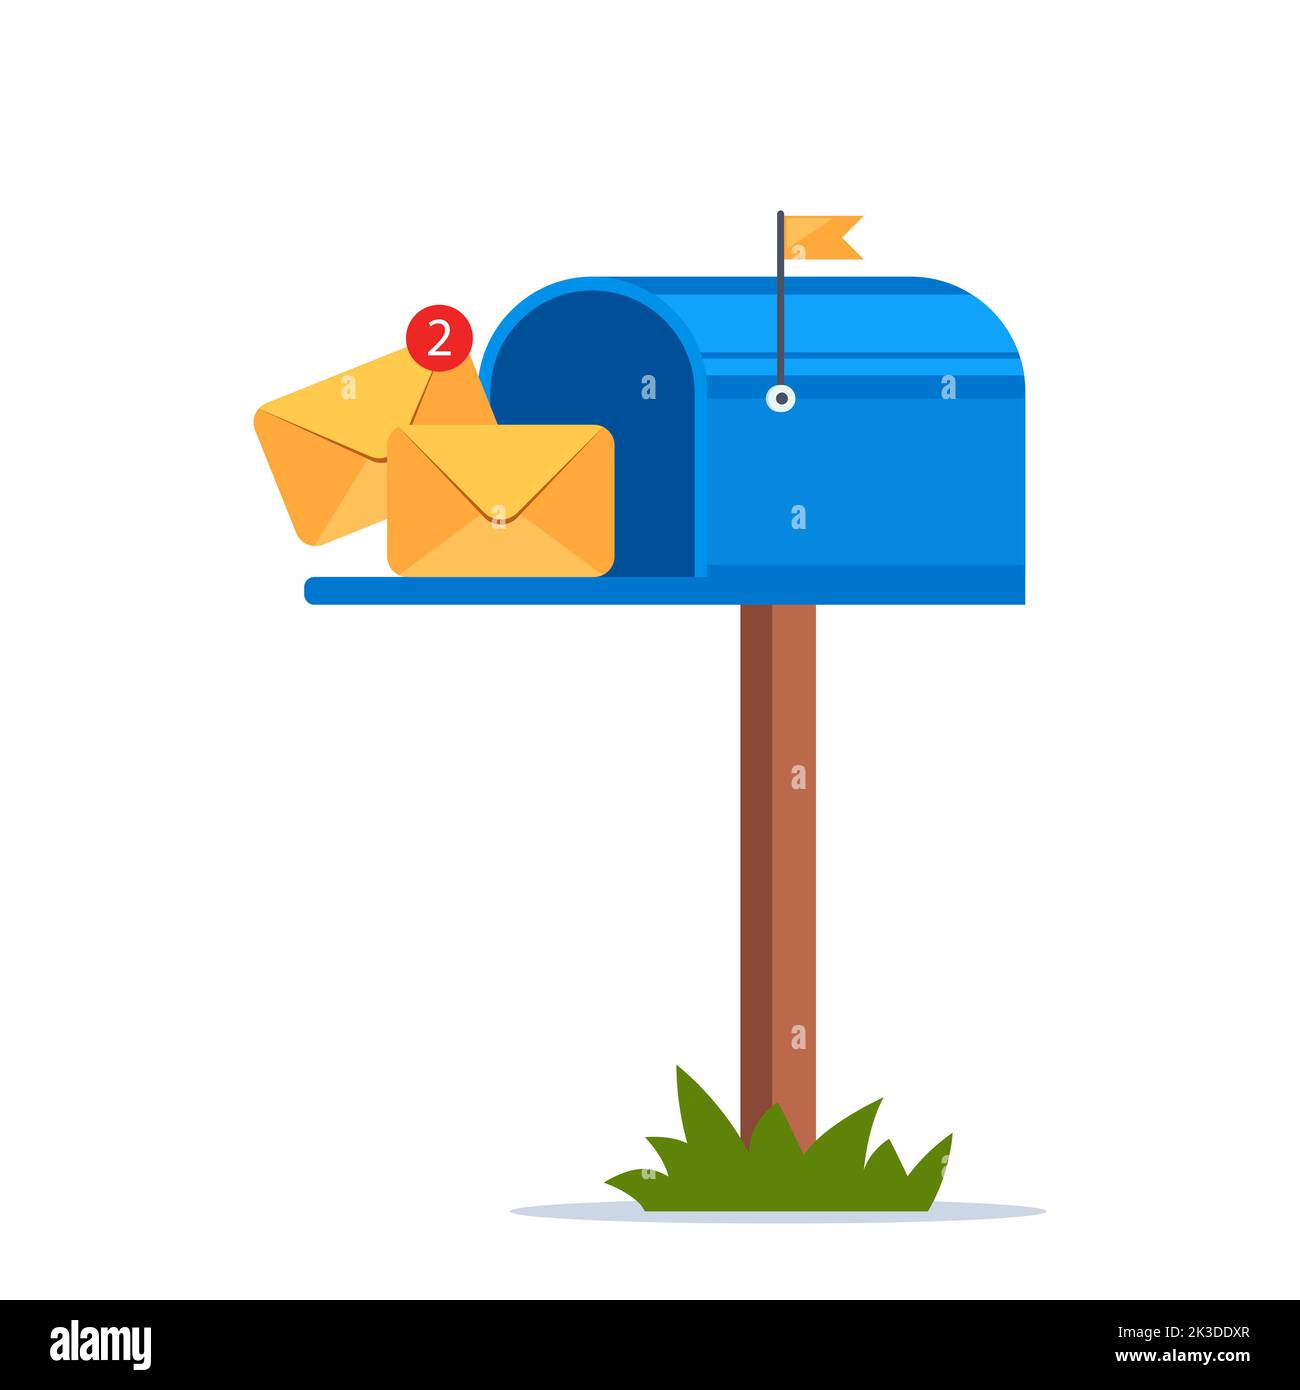 Letters in an open mailbox stock illustration. Illustration of